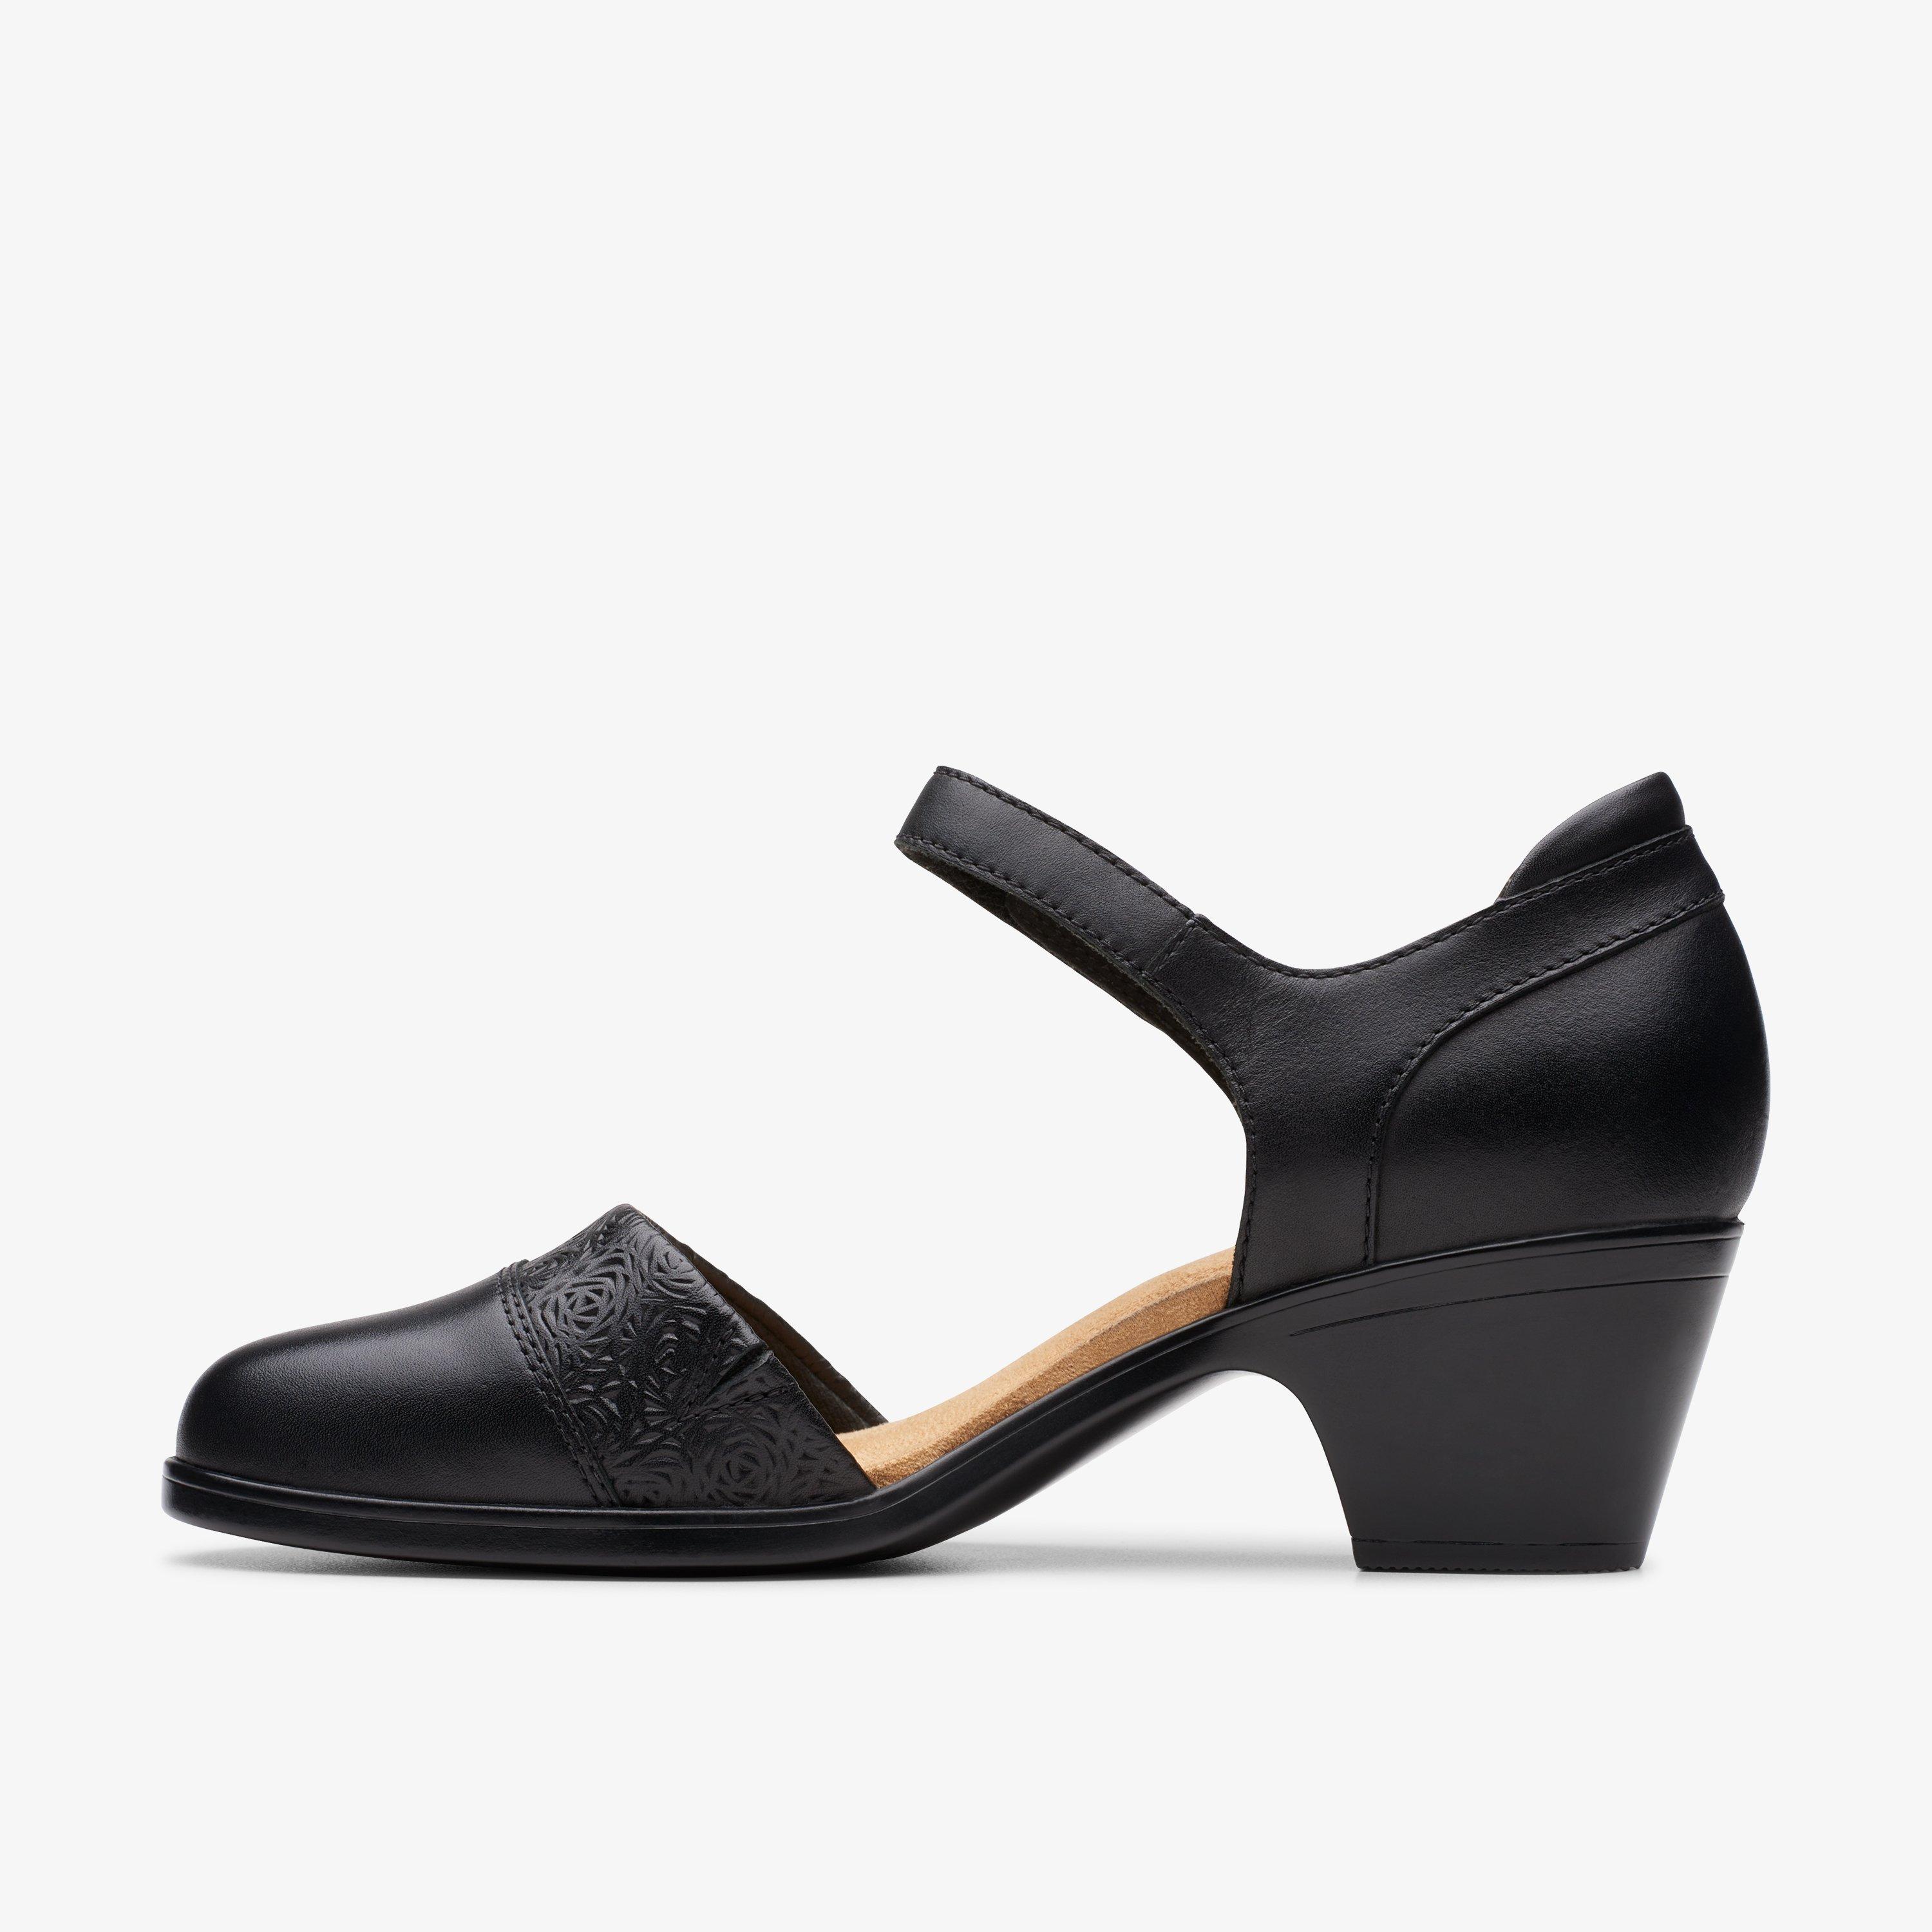 Women's Wide Fit Shoes - Wide & Extra Wide Shoes